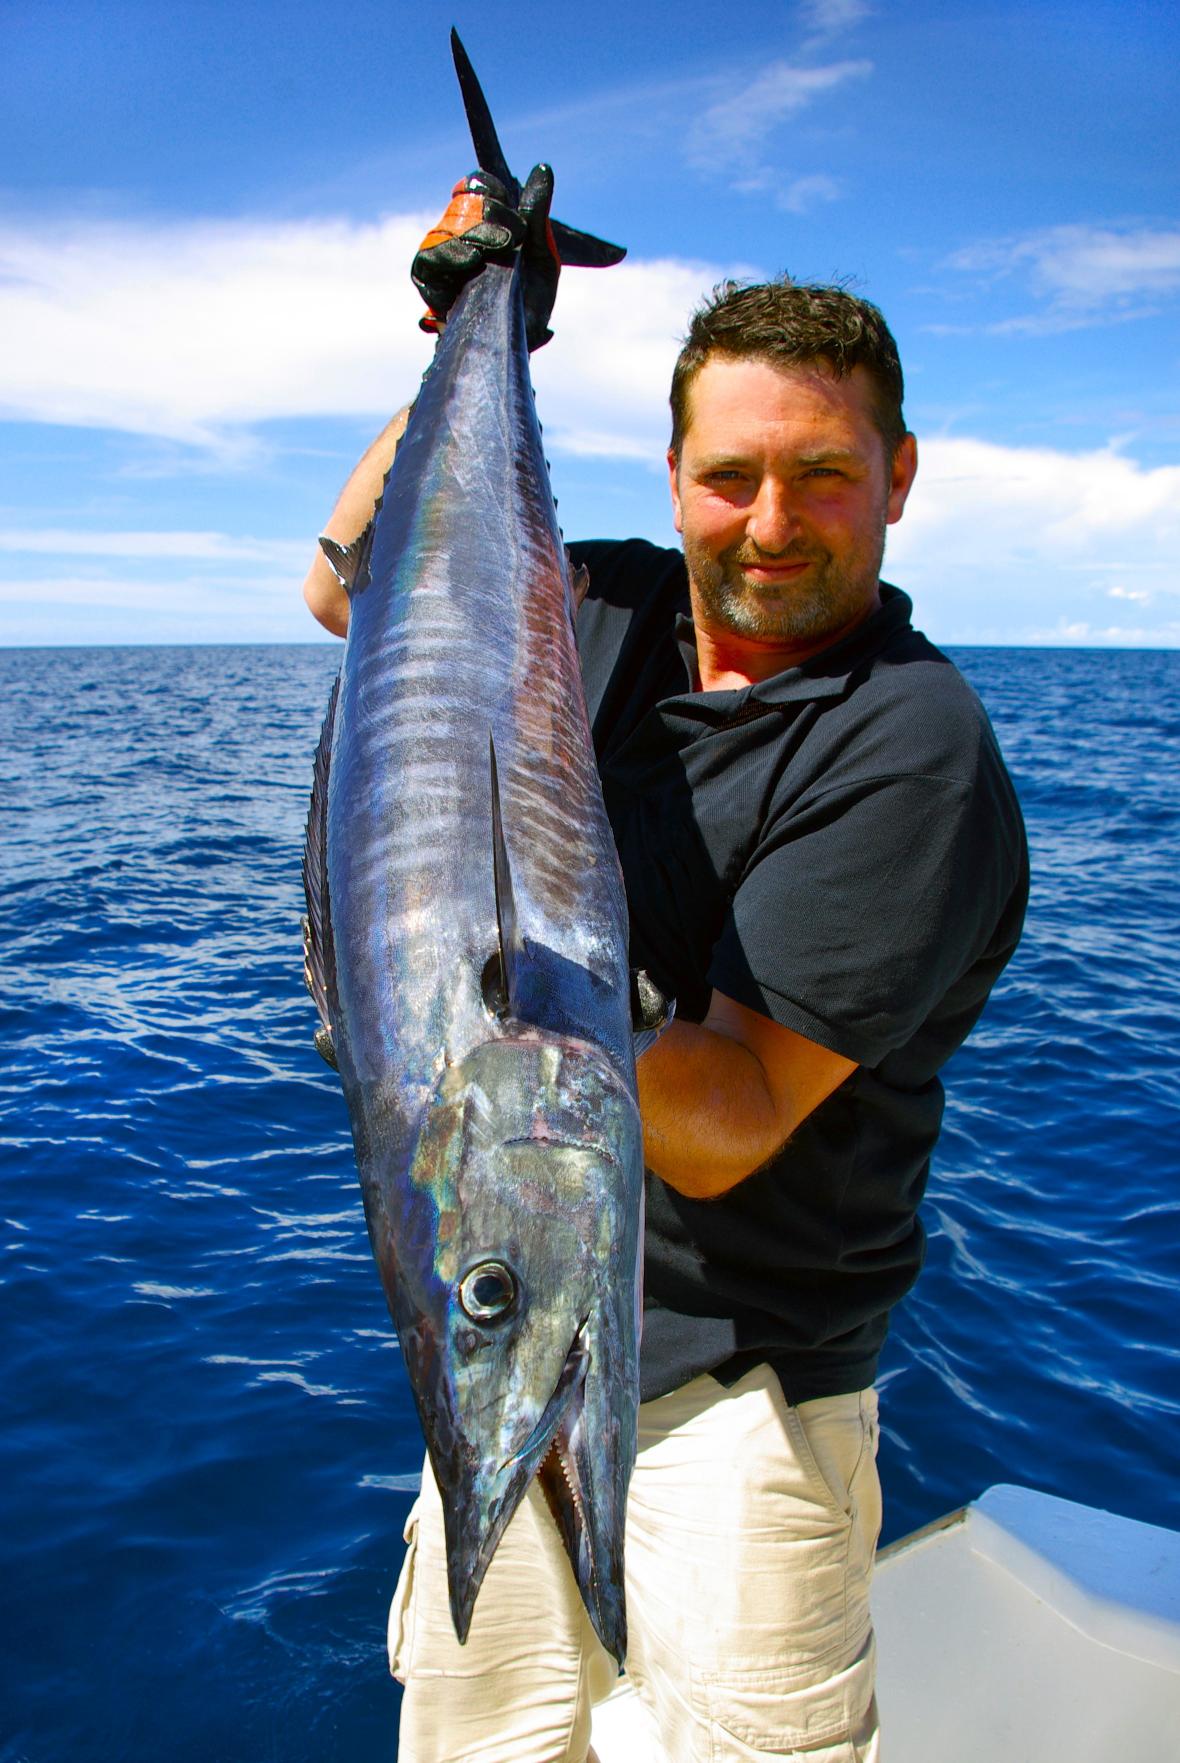 Is there Good Fishing in Maui?